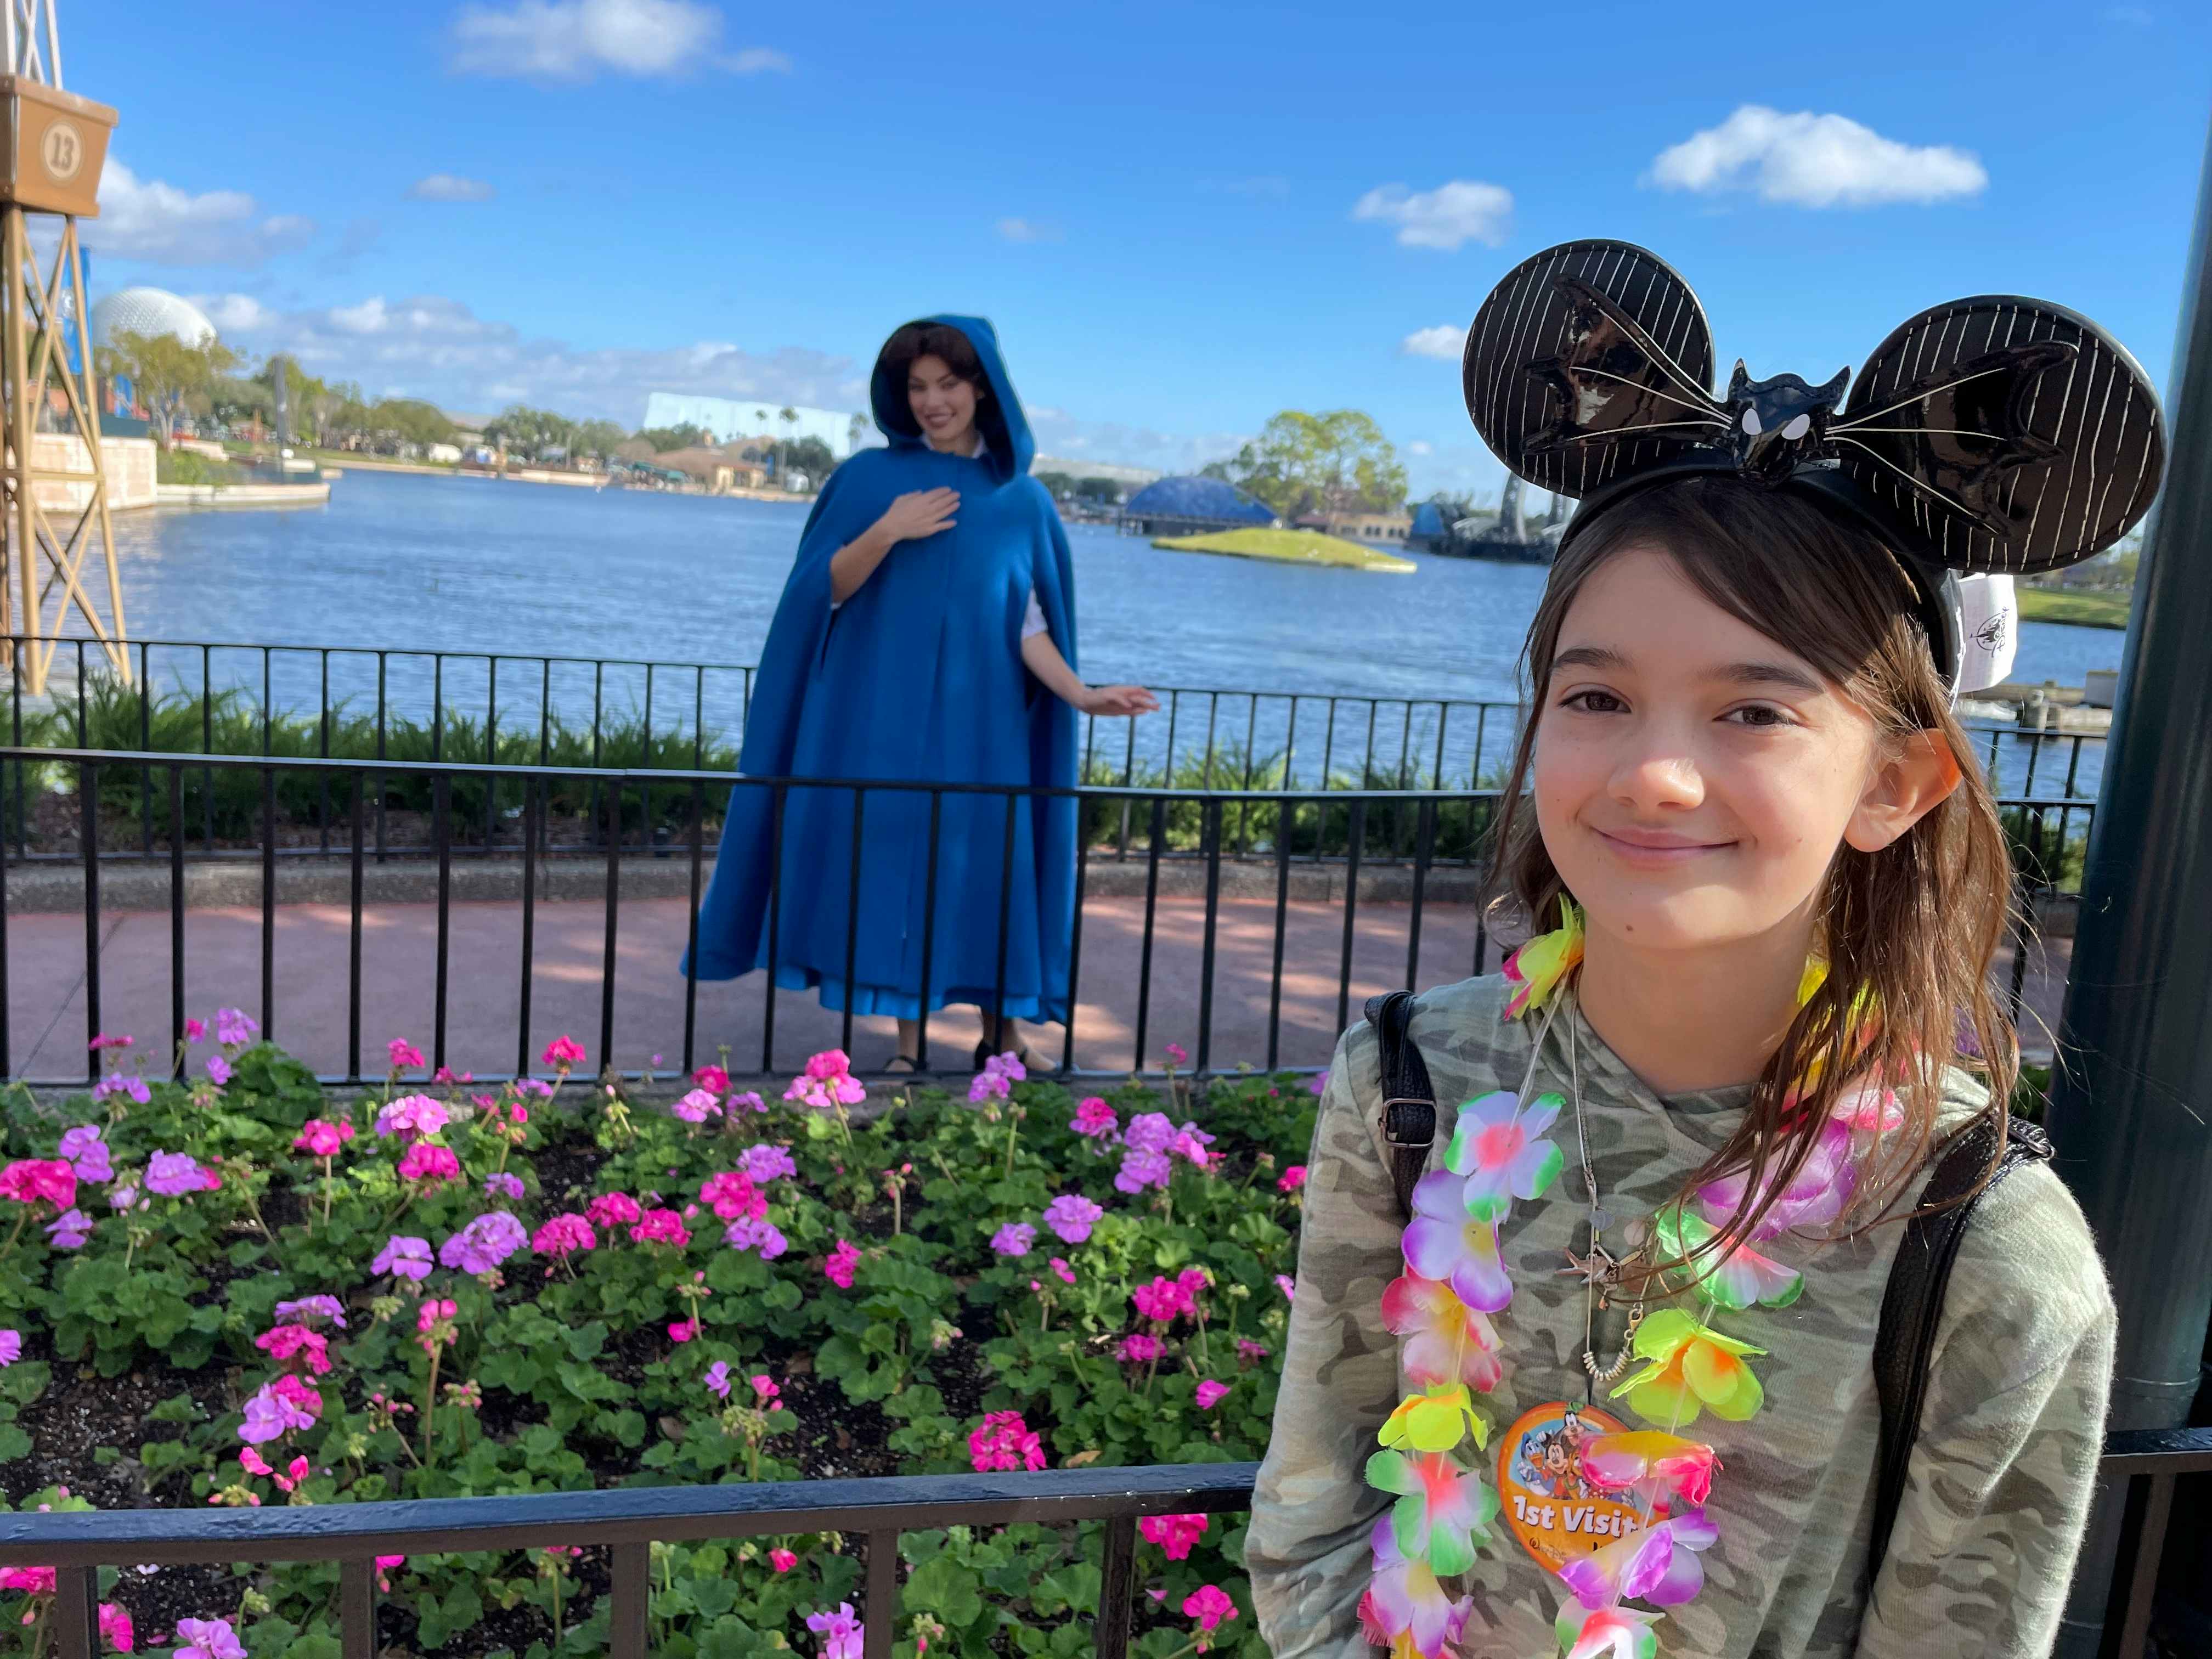 A child standing near a garden with Princess Belle in the background at Disney World.